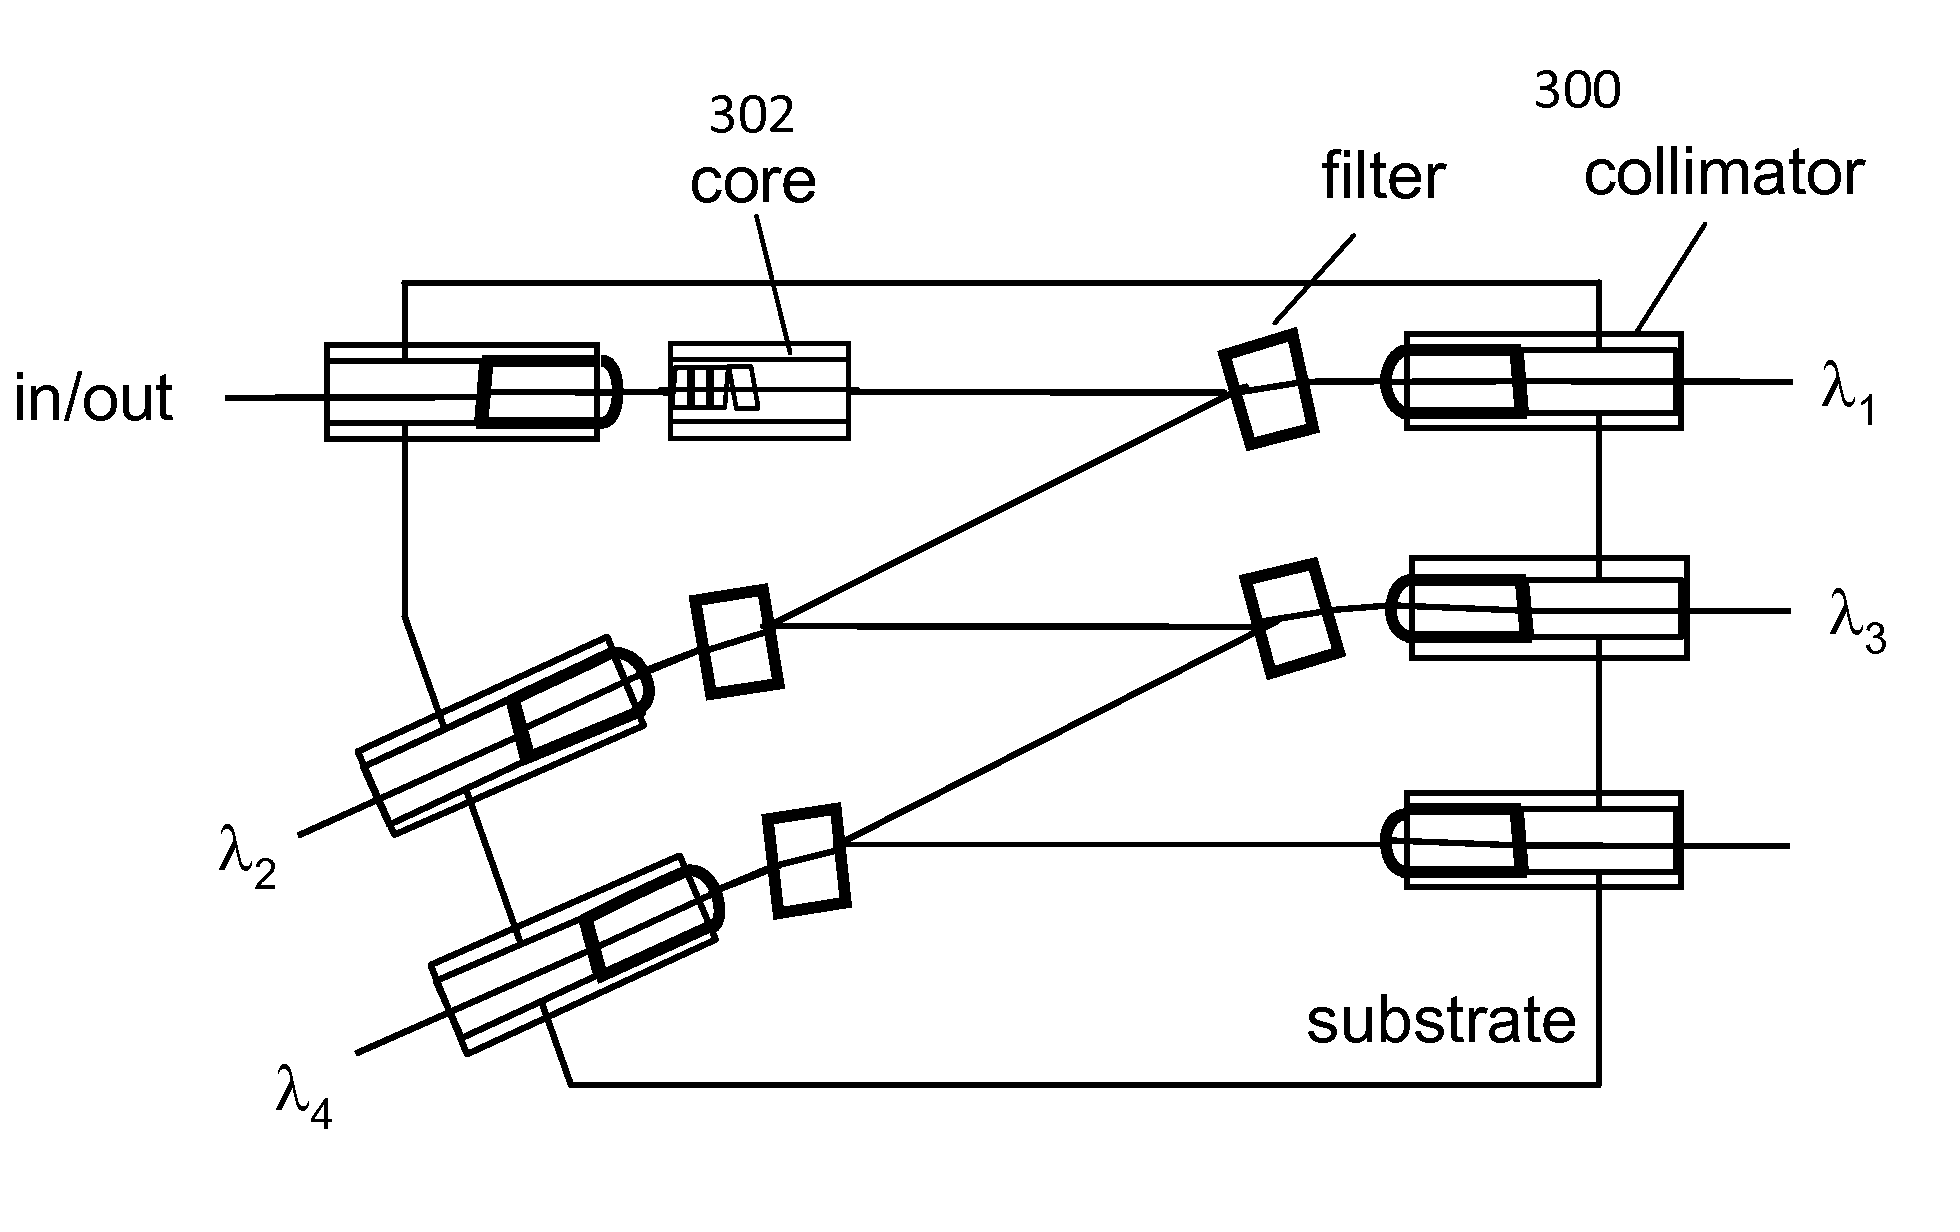 Optical devices with built-in isolators